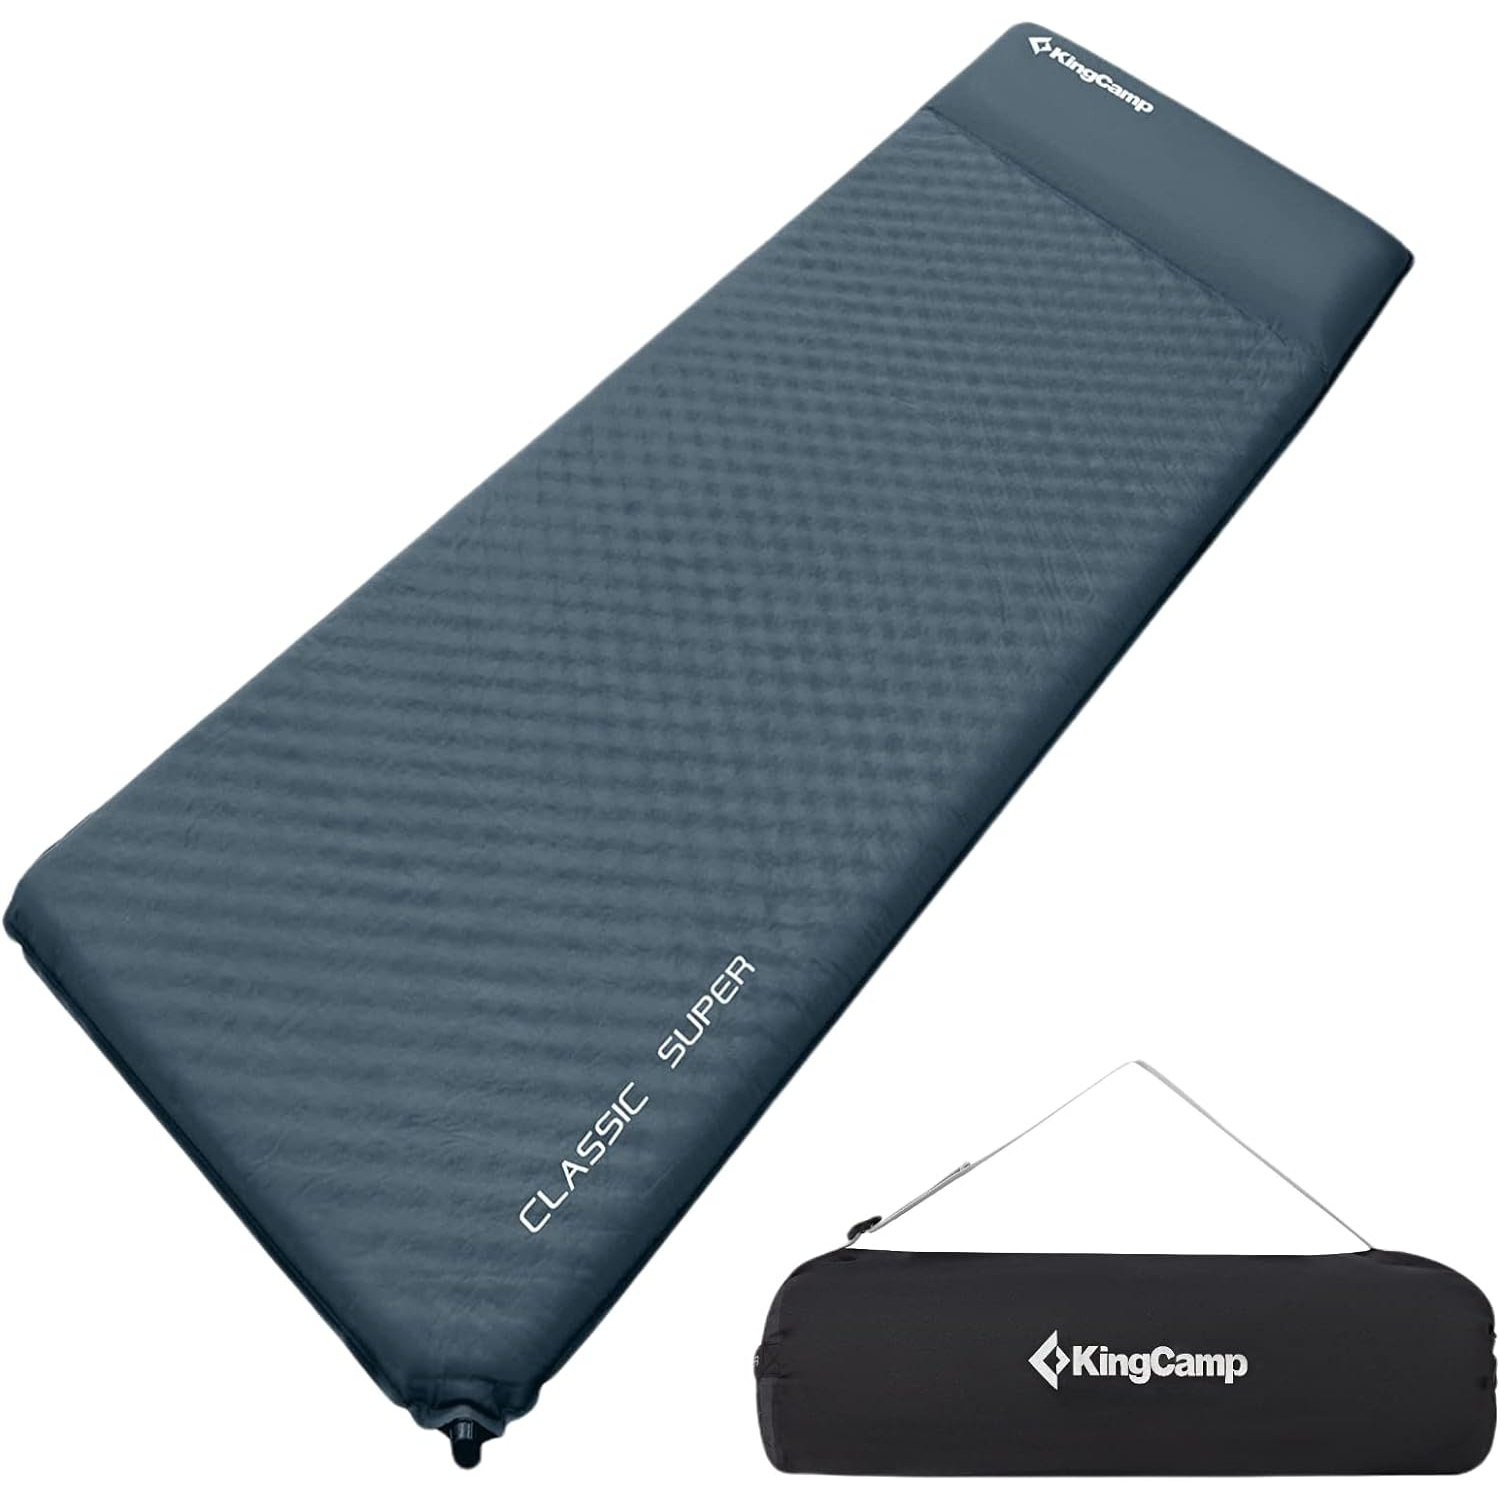 

Kingcamp Self-inflating Sleeping Mat, Suitable For Camping, Built-in Pillow, Ultralight Sleeping Mat, Camping Mat, Durable, Suitable For Camping Backpacking, Hiking, Single, 4 Sizes